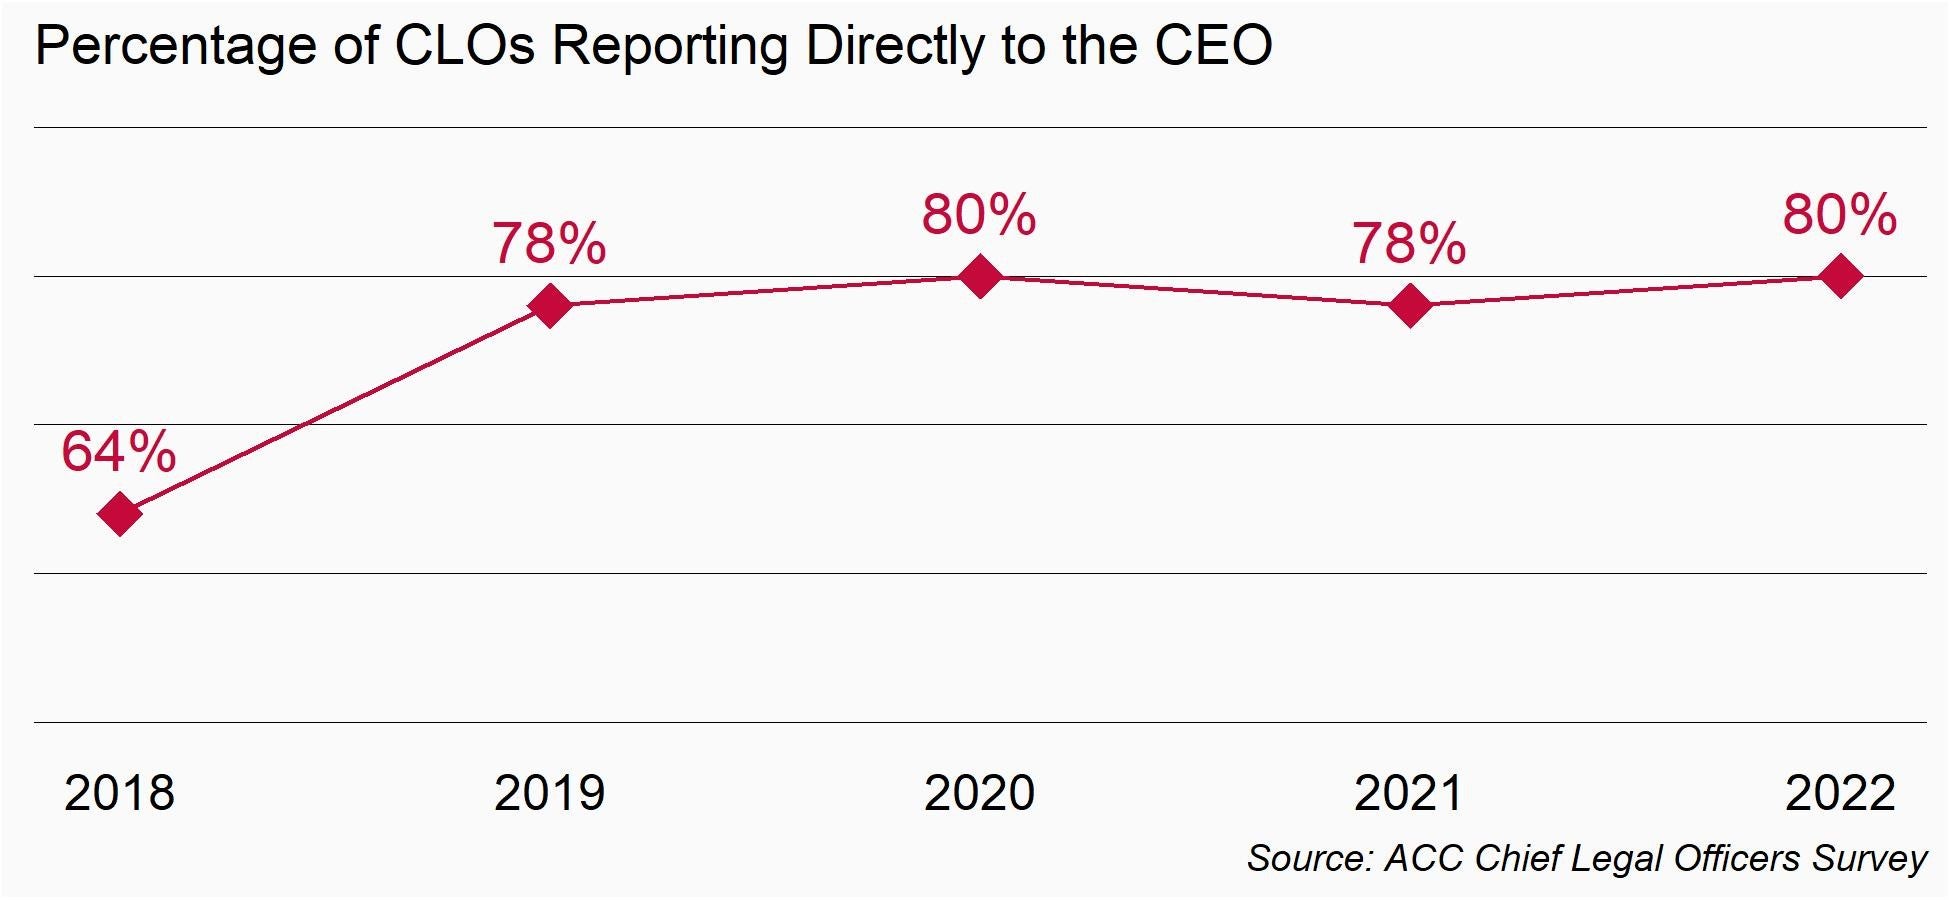 Percentage of CLOs Reporting Directly to the CEO, ACC Chief Legal Officers Survey